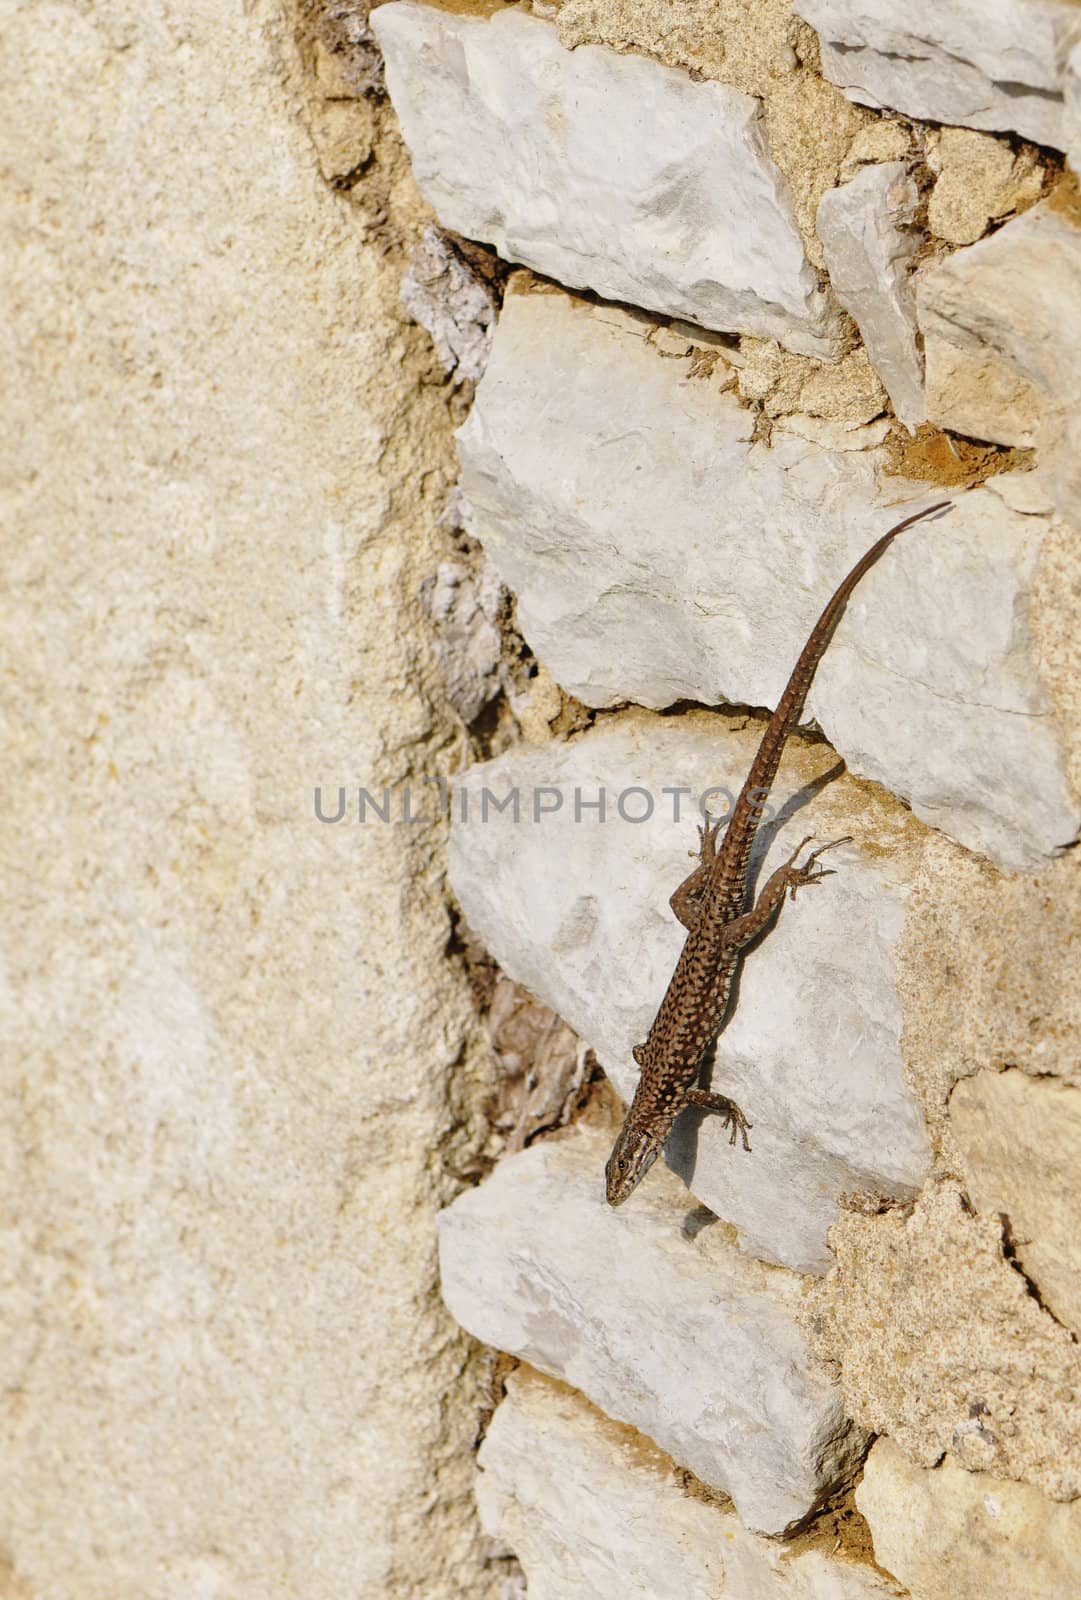 Brown Lizard Under the Sun on a Stone Wall